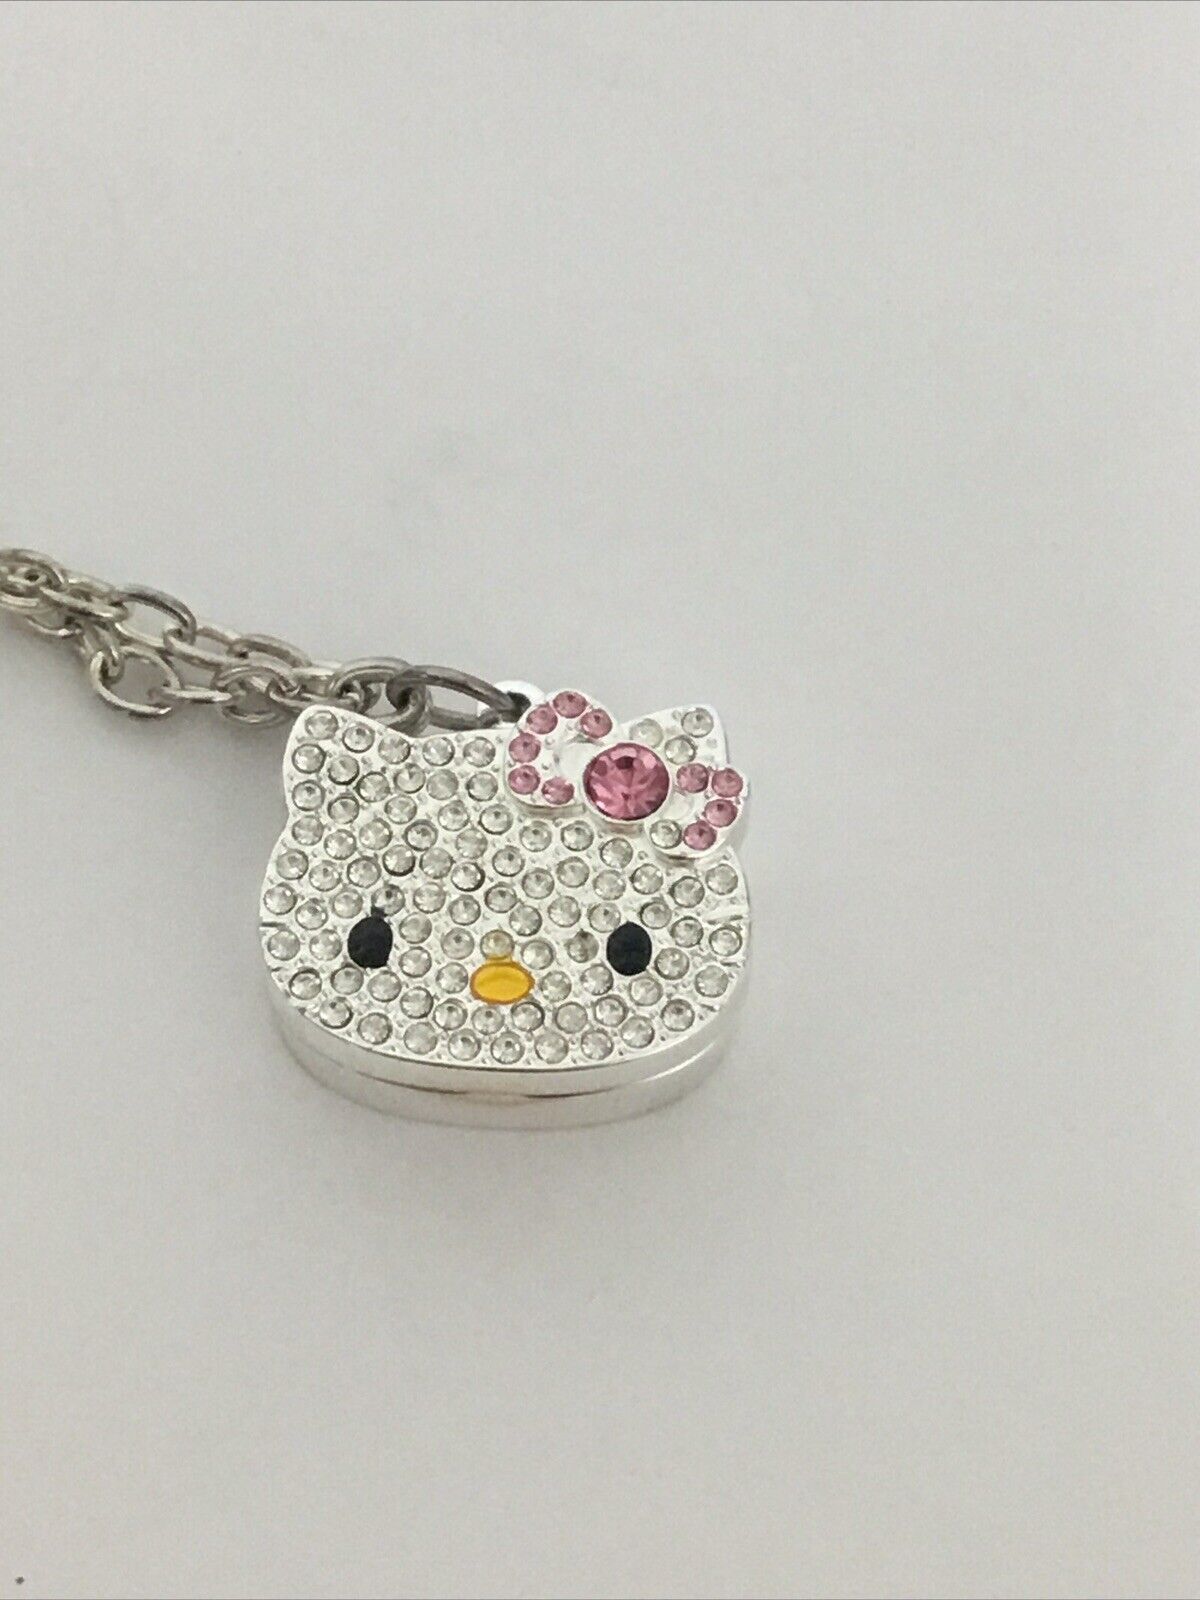 Hello Kitty 40 Year Anniversary Necklace with Solid Scented Perfum Touched